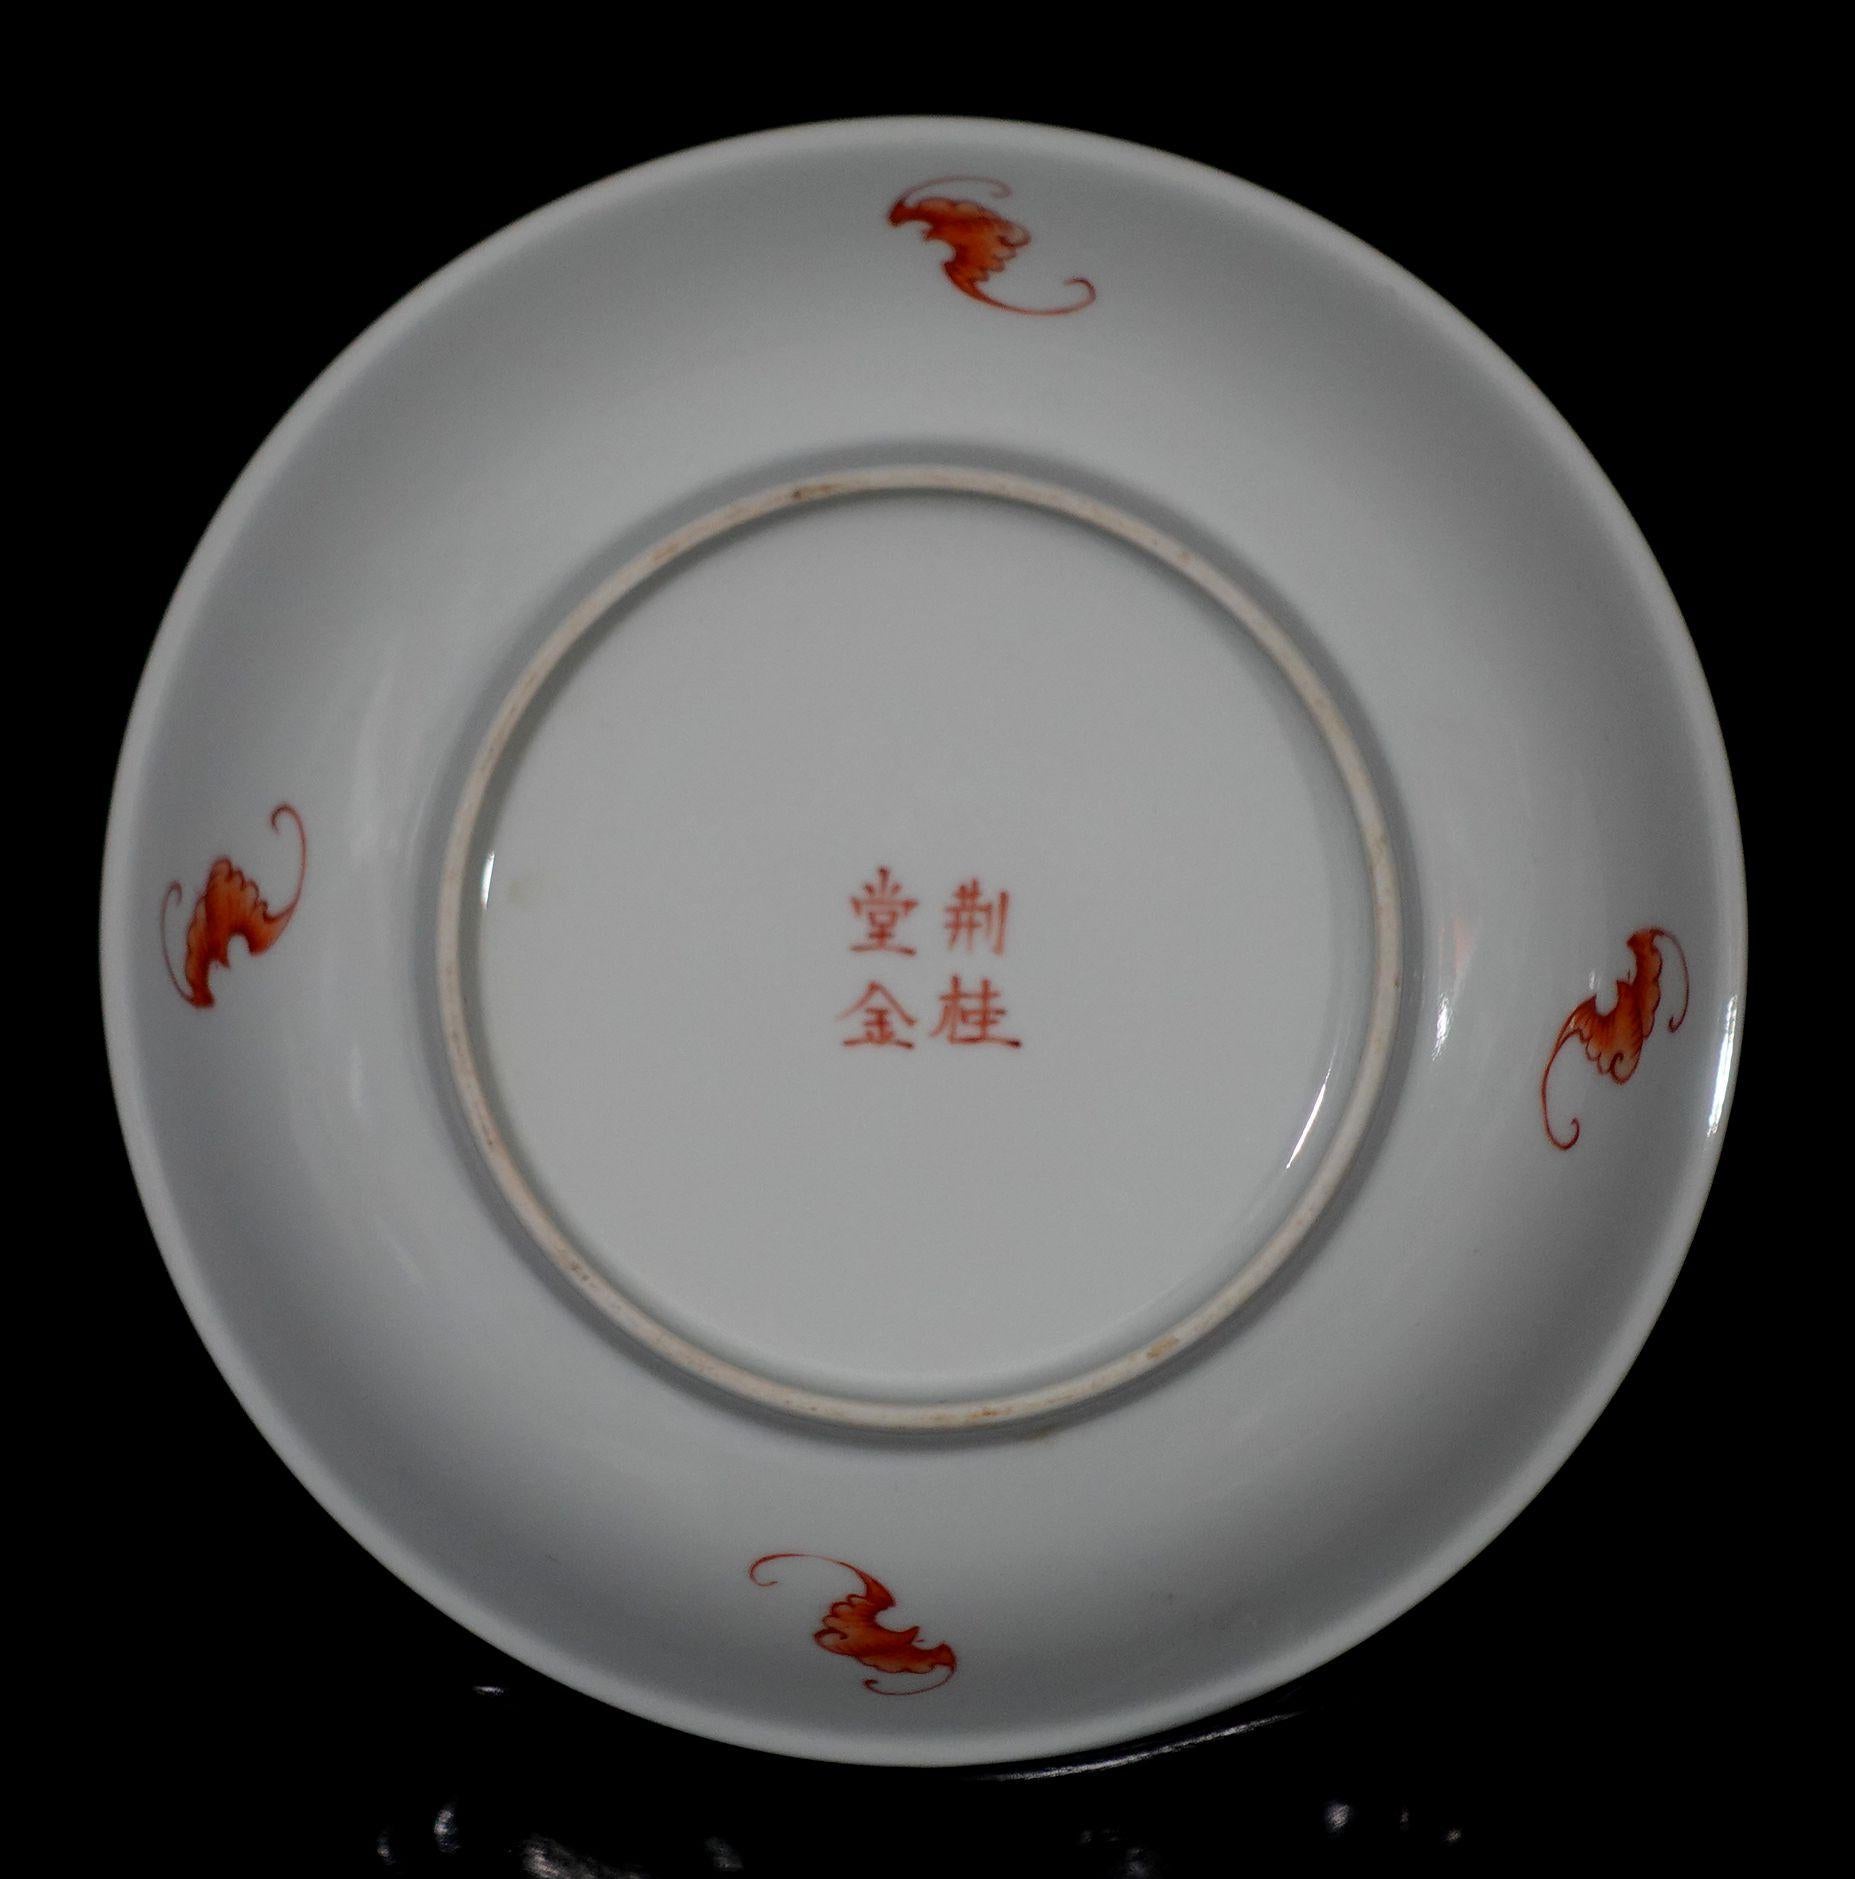 Antique Pair of Famille Rose Plates on Wood Stands Marked (荊桂堂金), 19th Century For Sale 3